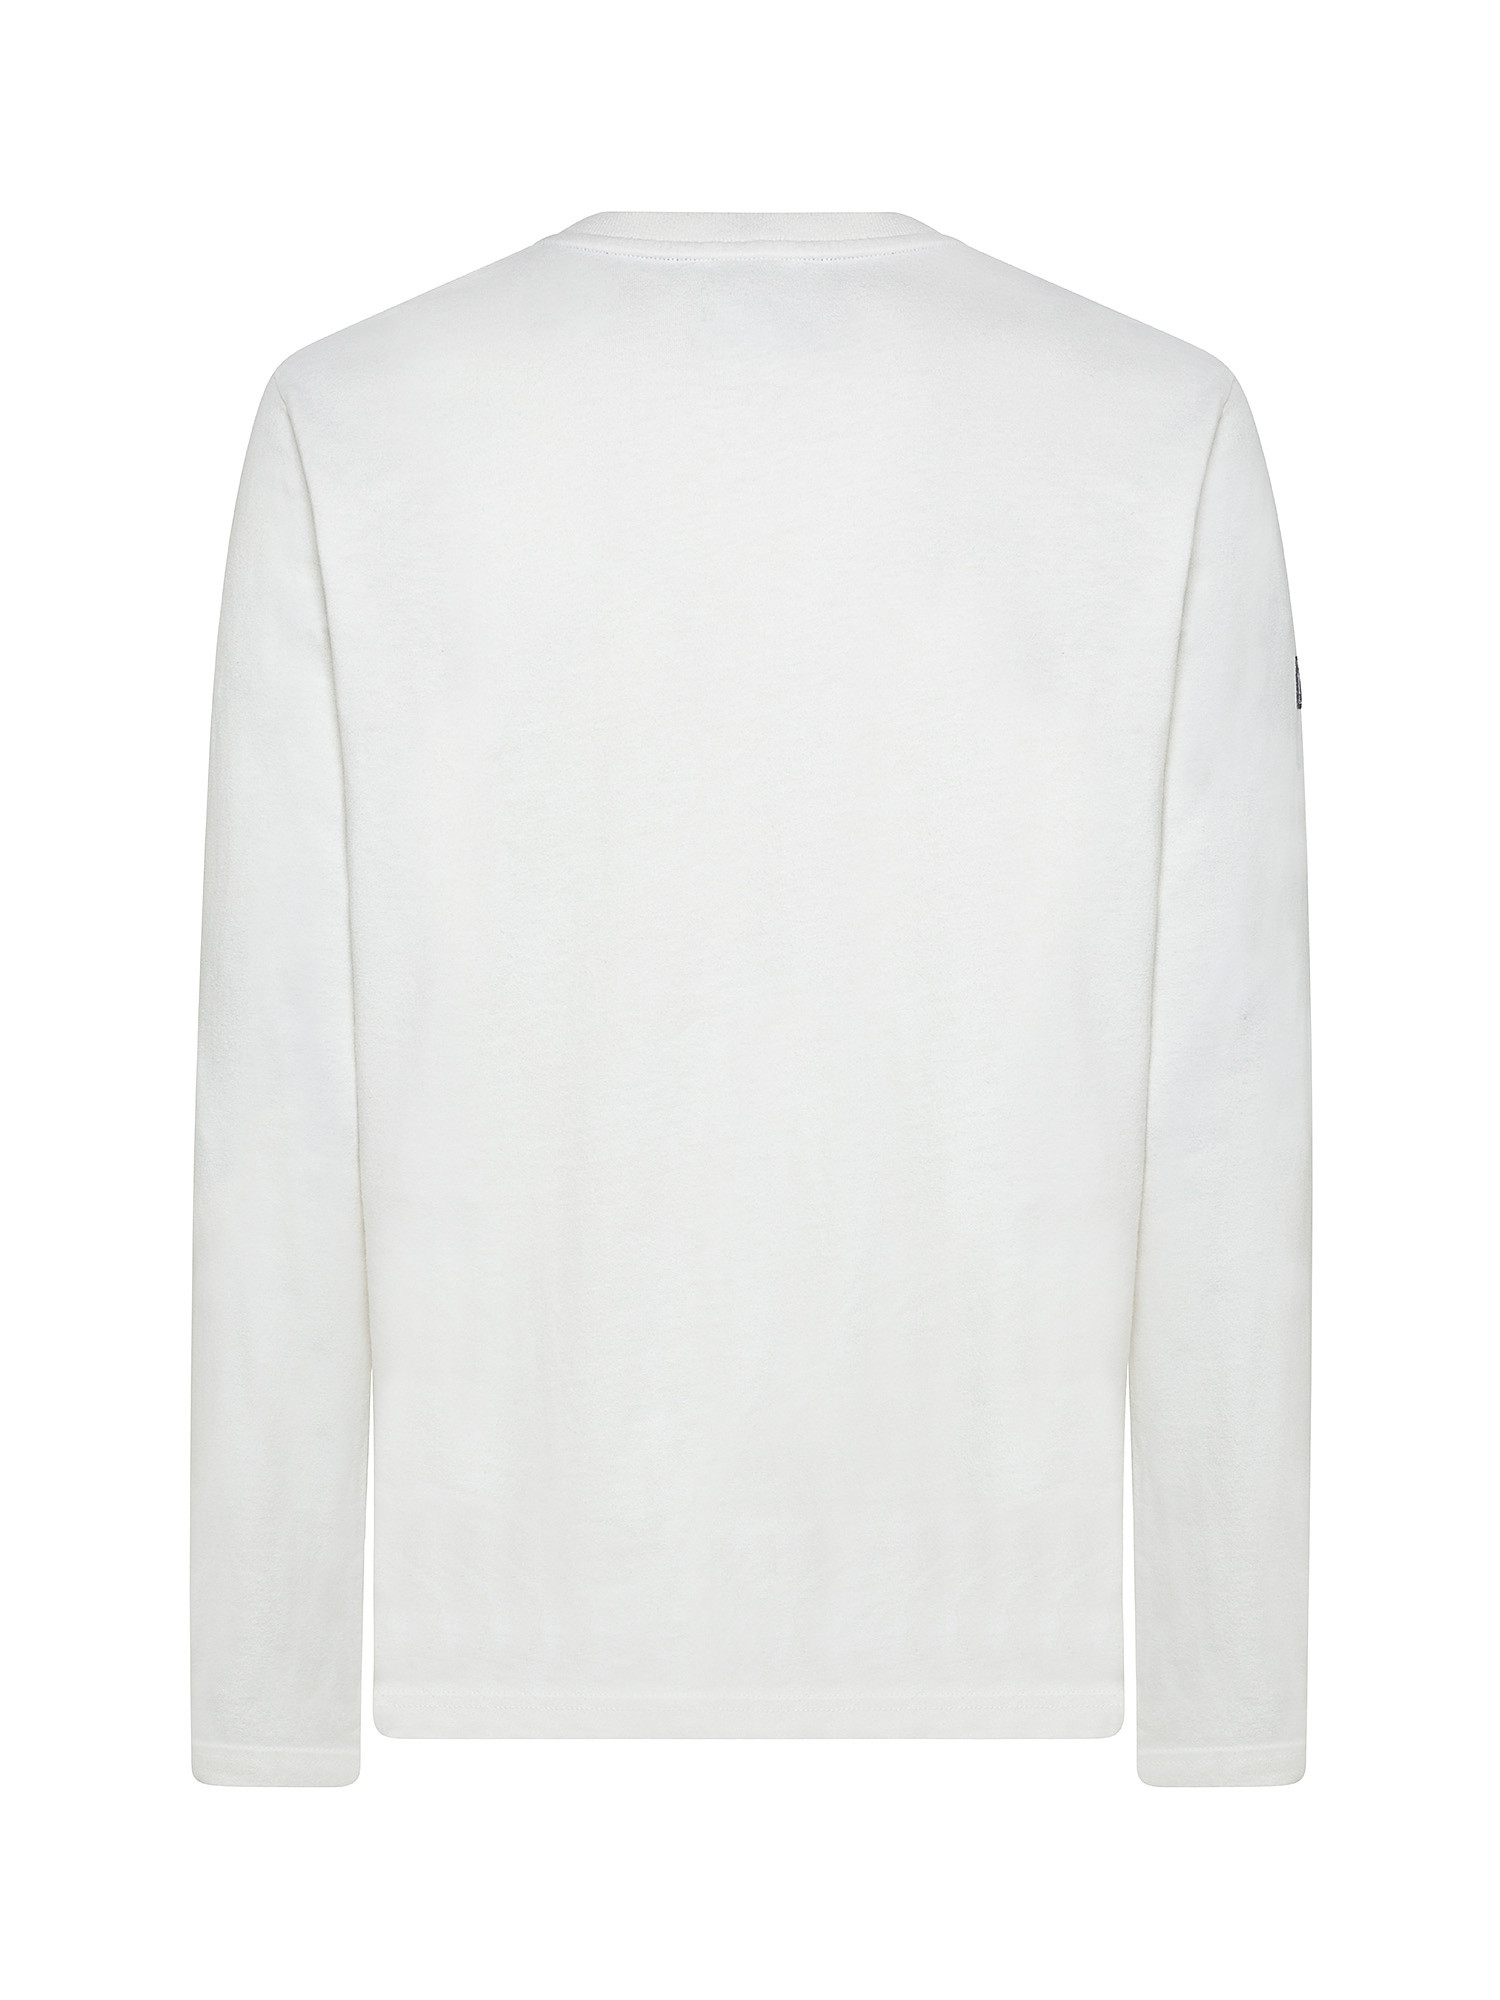 Long-sleeved t-shirt with print, White, large image number 1